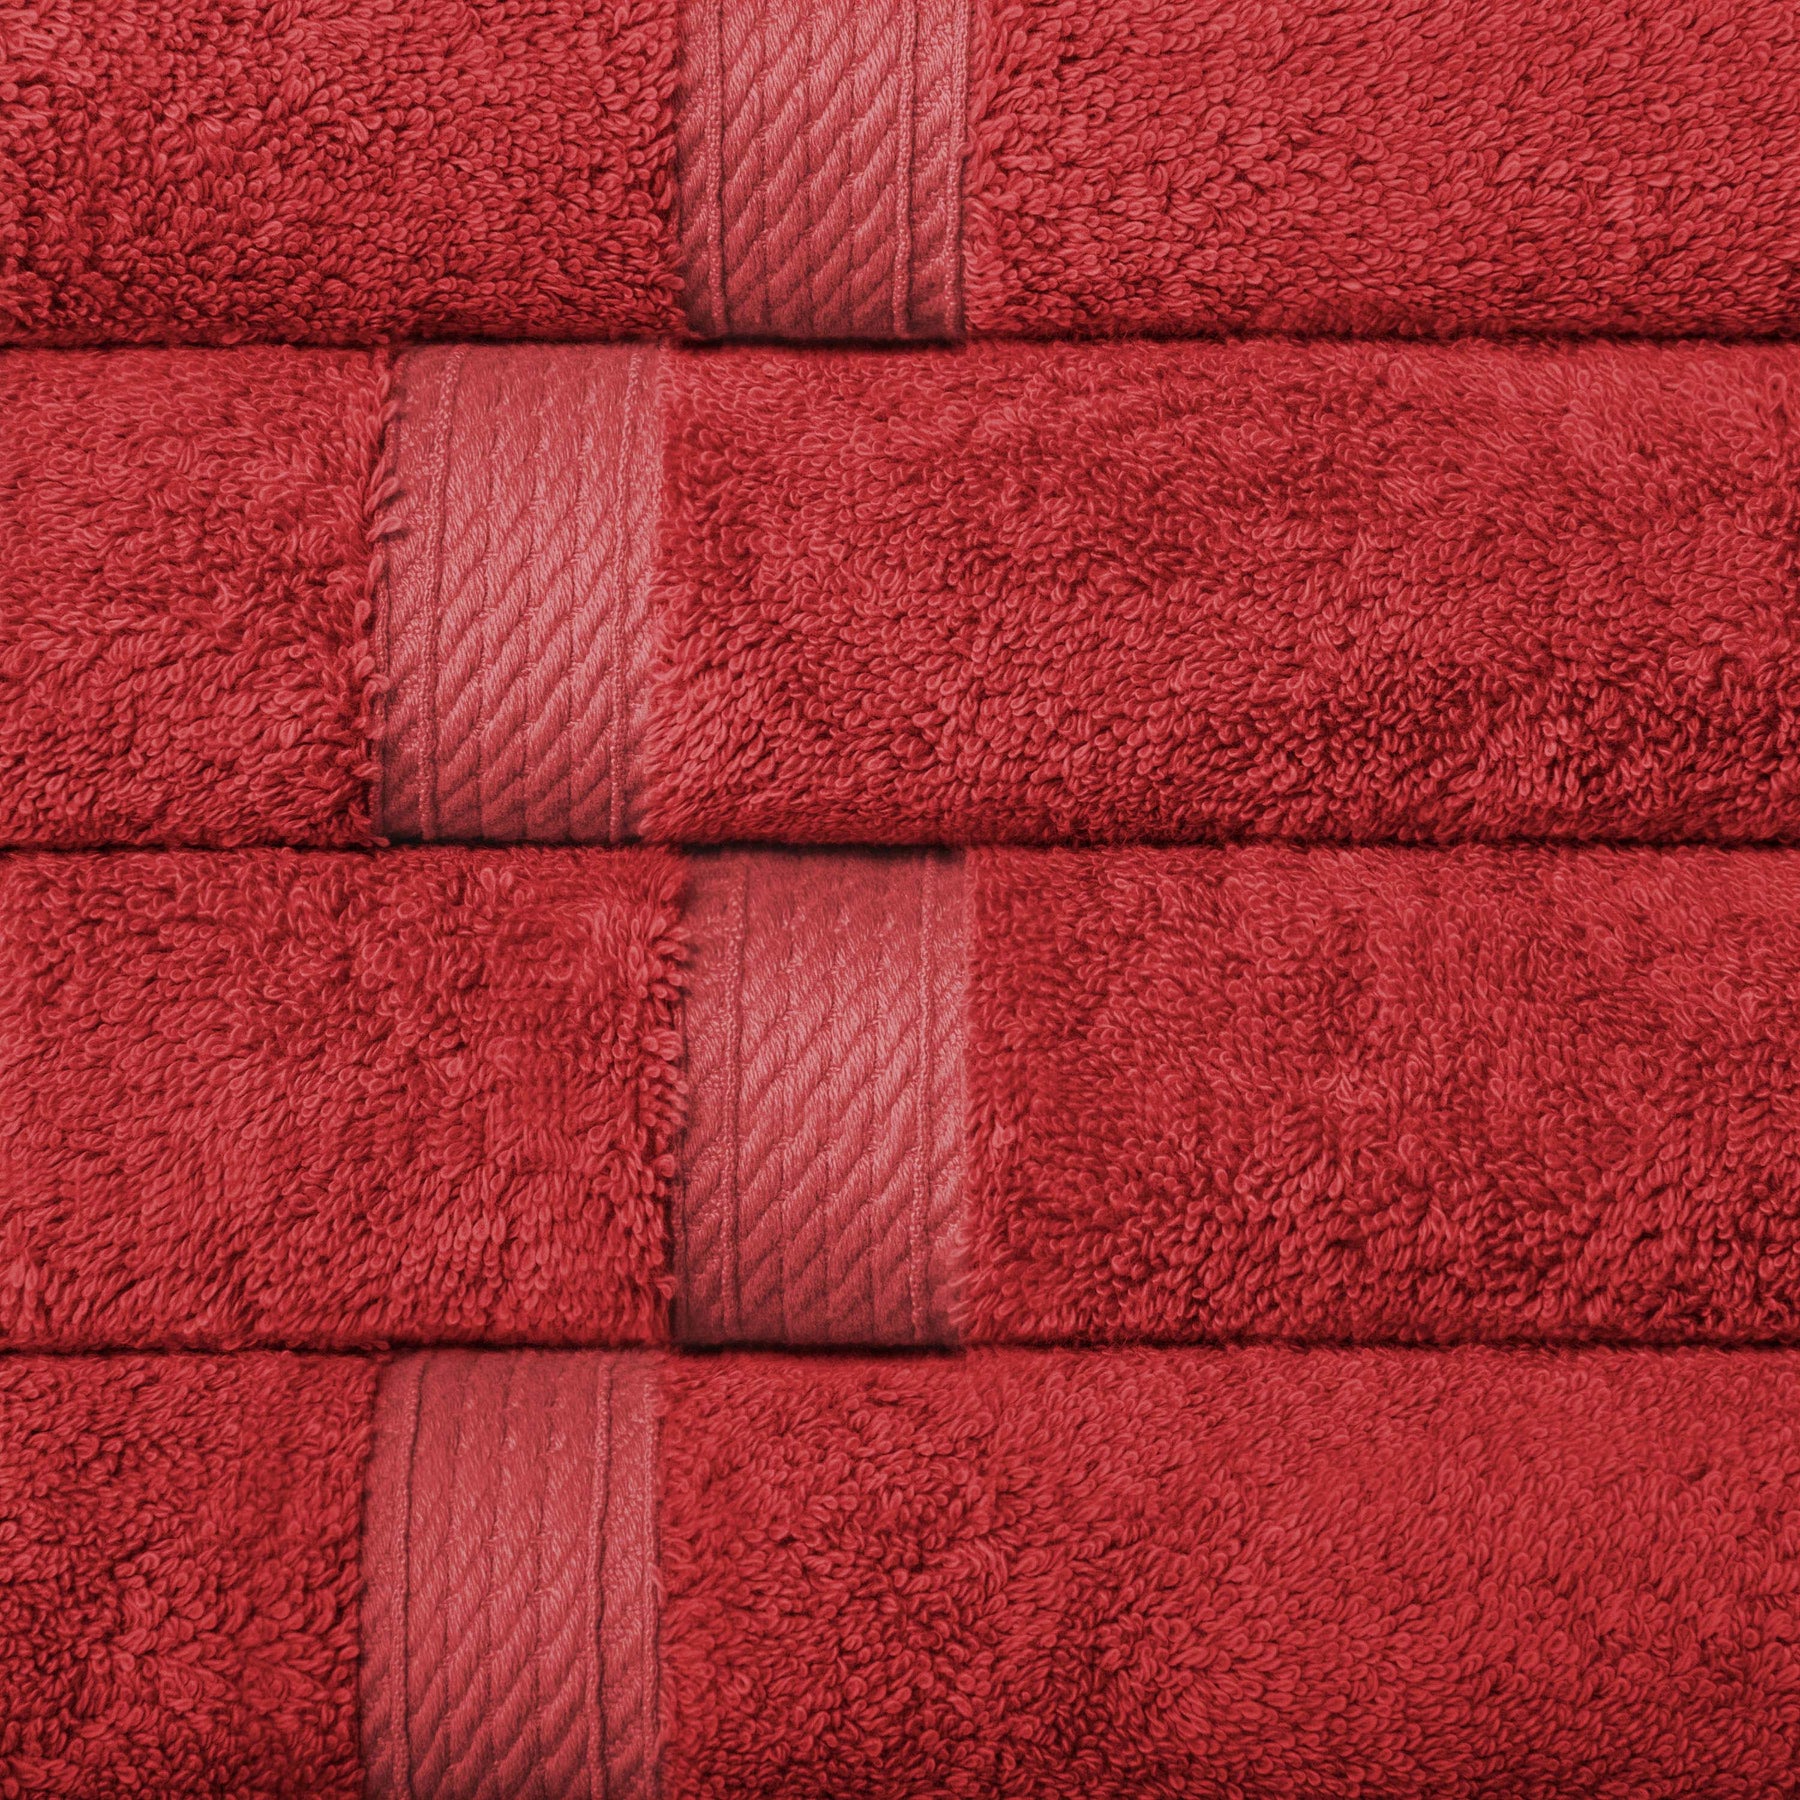 Superior Egyptian Cotton Plush Heavyweight Absorbent Luxury Soft Bath Towel - Red